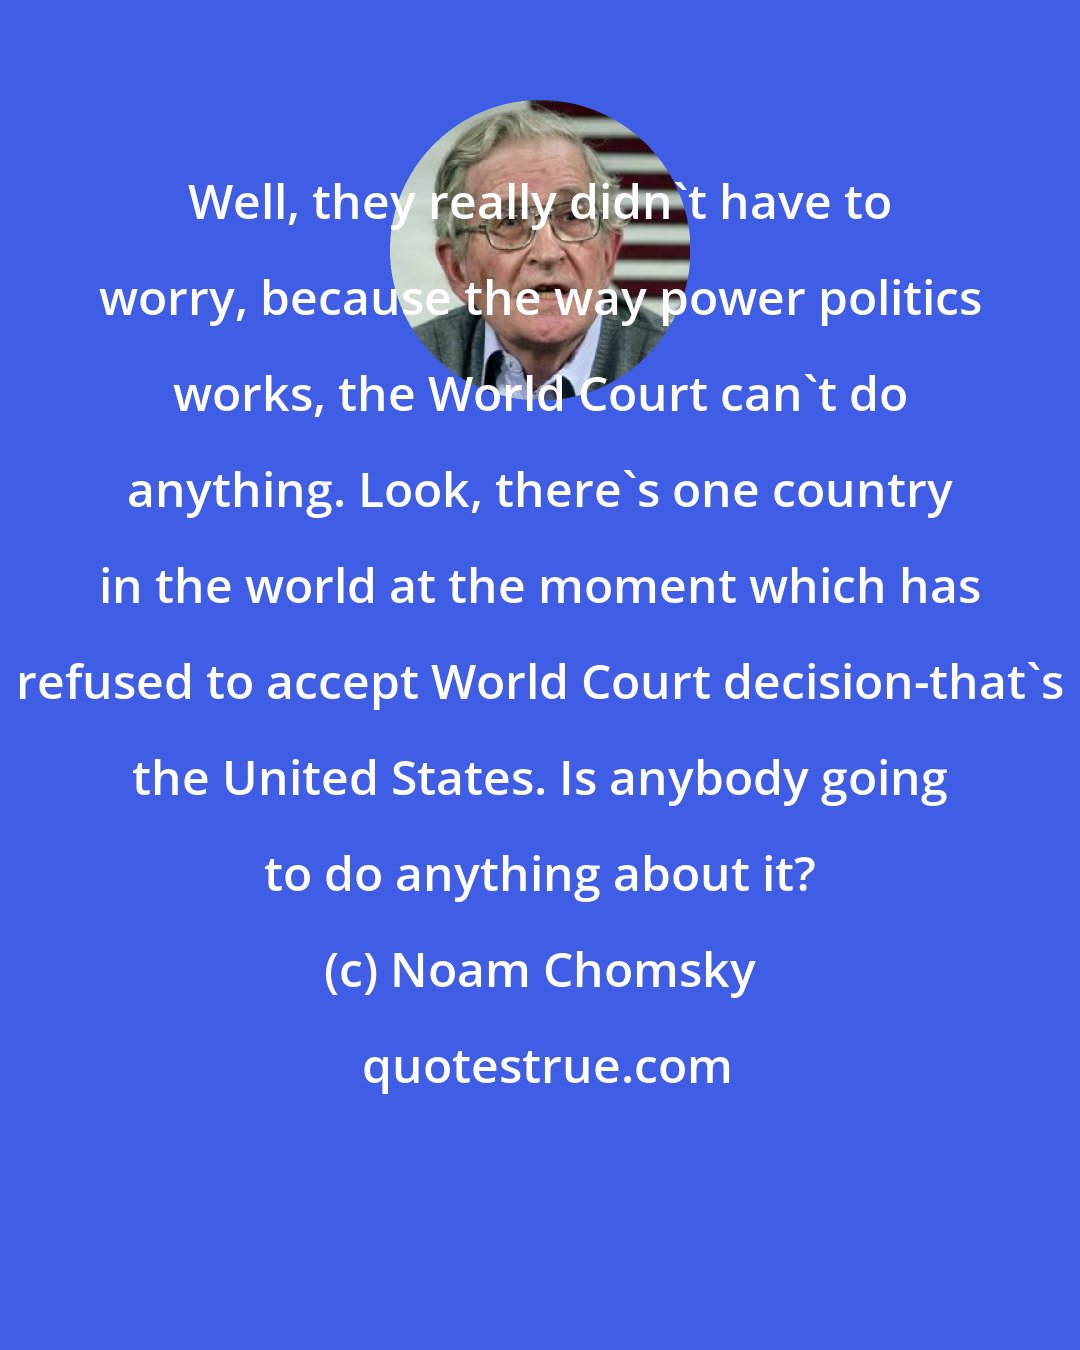 Noam Chomsky: Well, they really didn't have to worry, because the way power politics works, the World Court can't do anything. Look, there's one country in the world at the moment which has refused to accept World Court decision-that's the United States. Is anybody going to do anything about it?